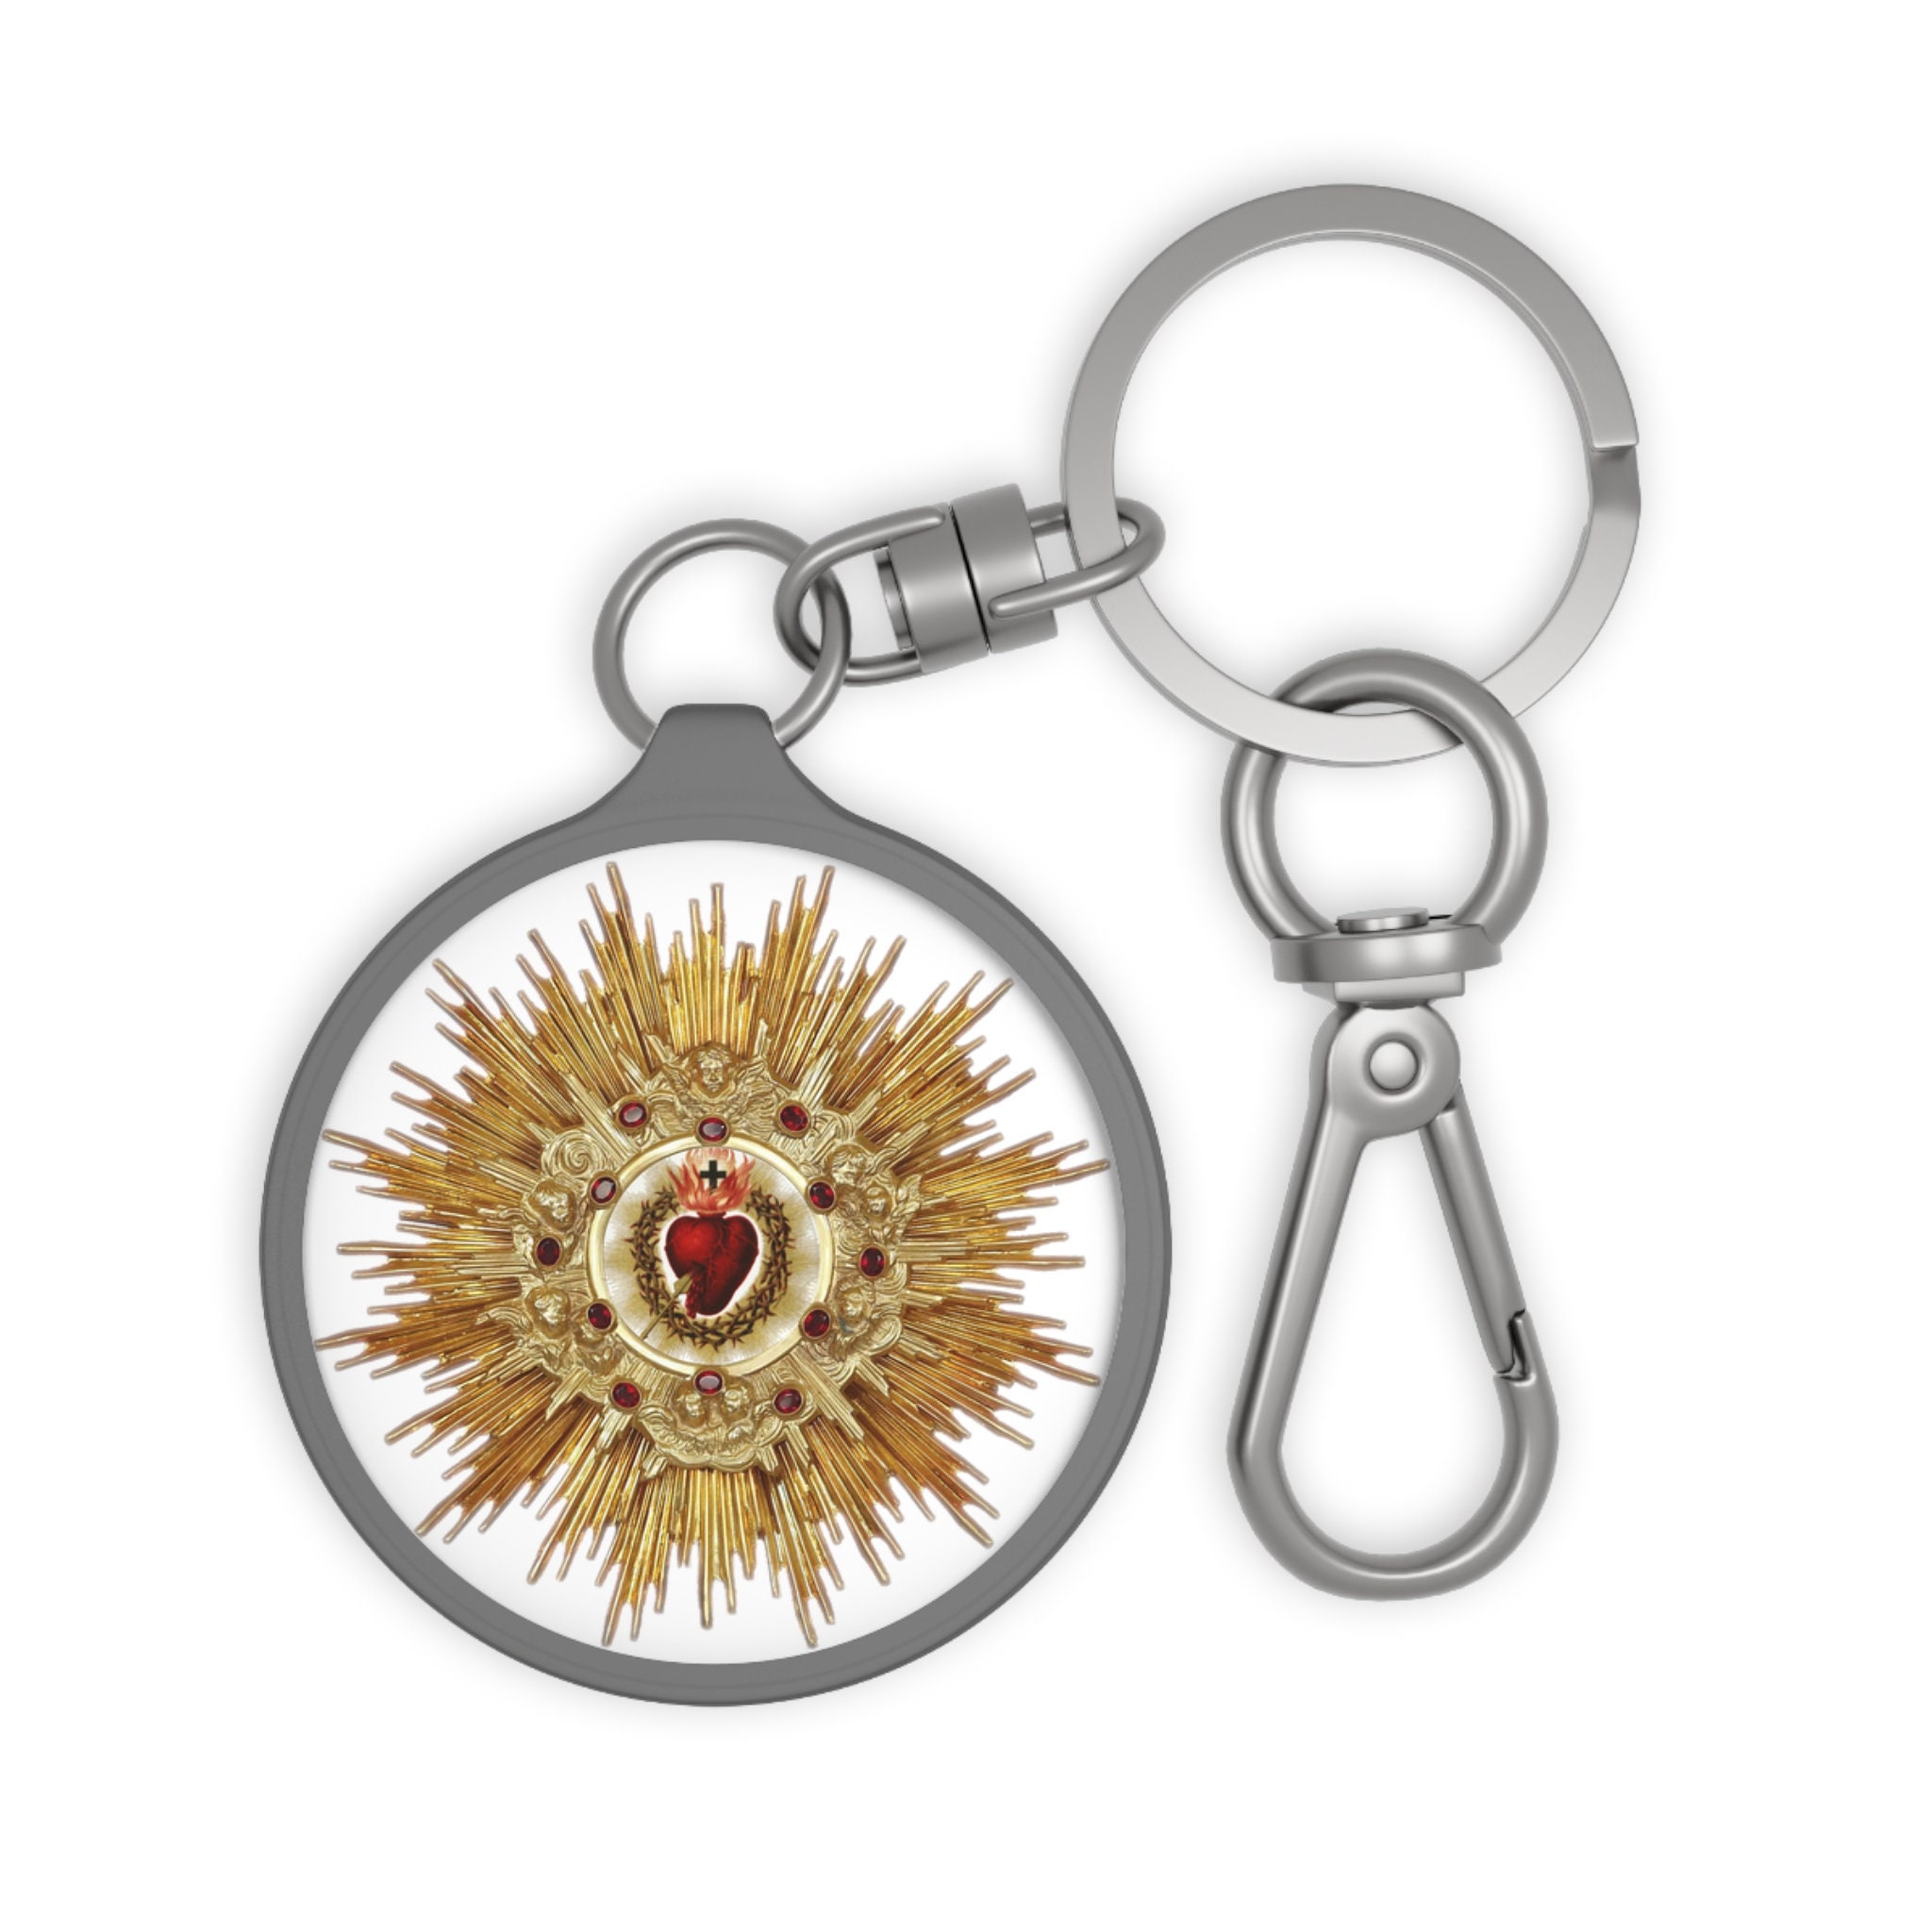 Vintage 18k Woven Gold Key Chain With Religious Medal and Gold Key Ring  Gruppach Orfeo Key Chain Jesus Christ Medal Unisex Religious Gift 